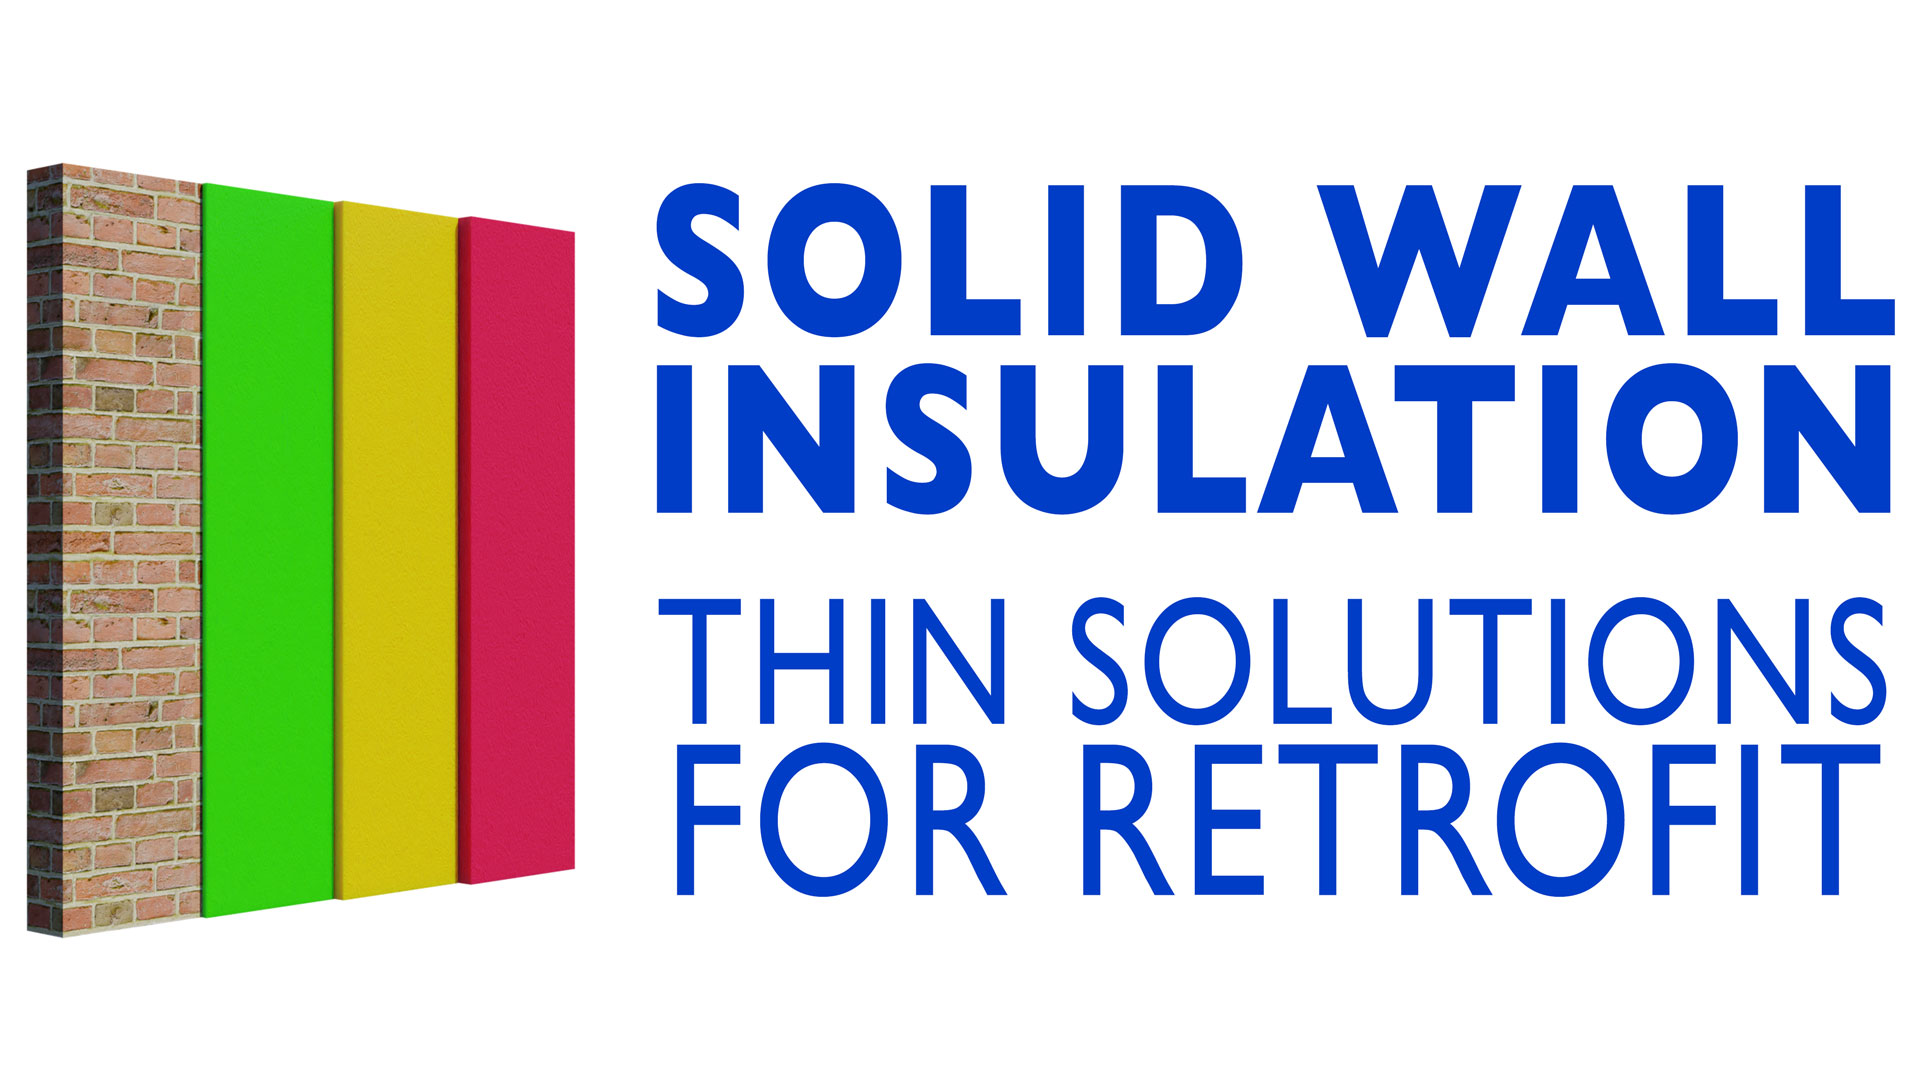 Solid Wall Insulation: Thin Solutions for Retrofit